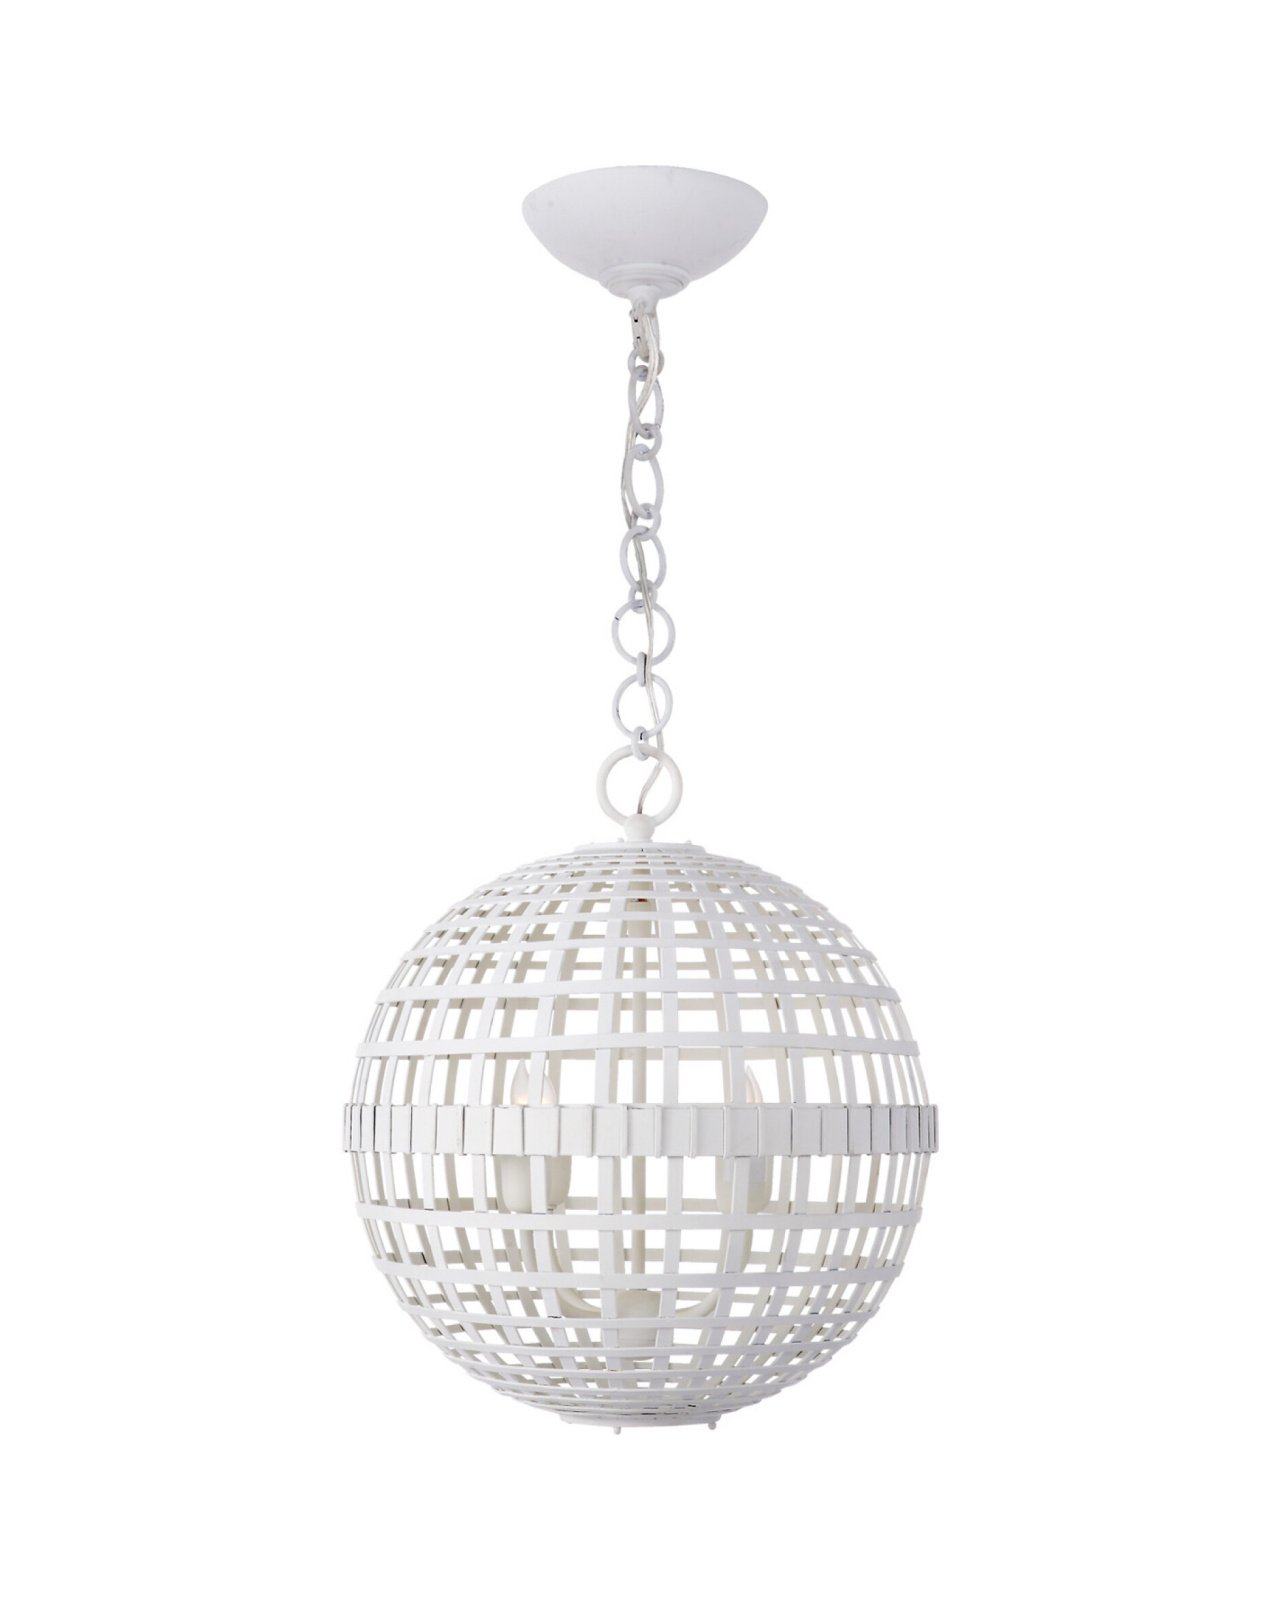 Mill Ceiling Light White Small